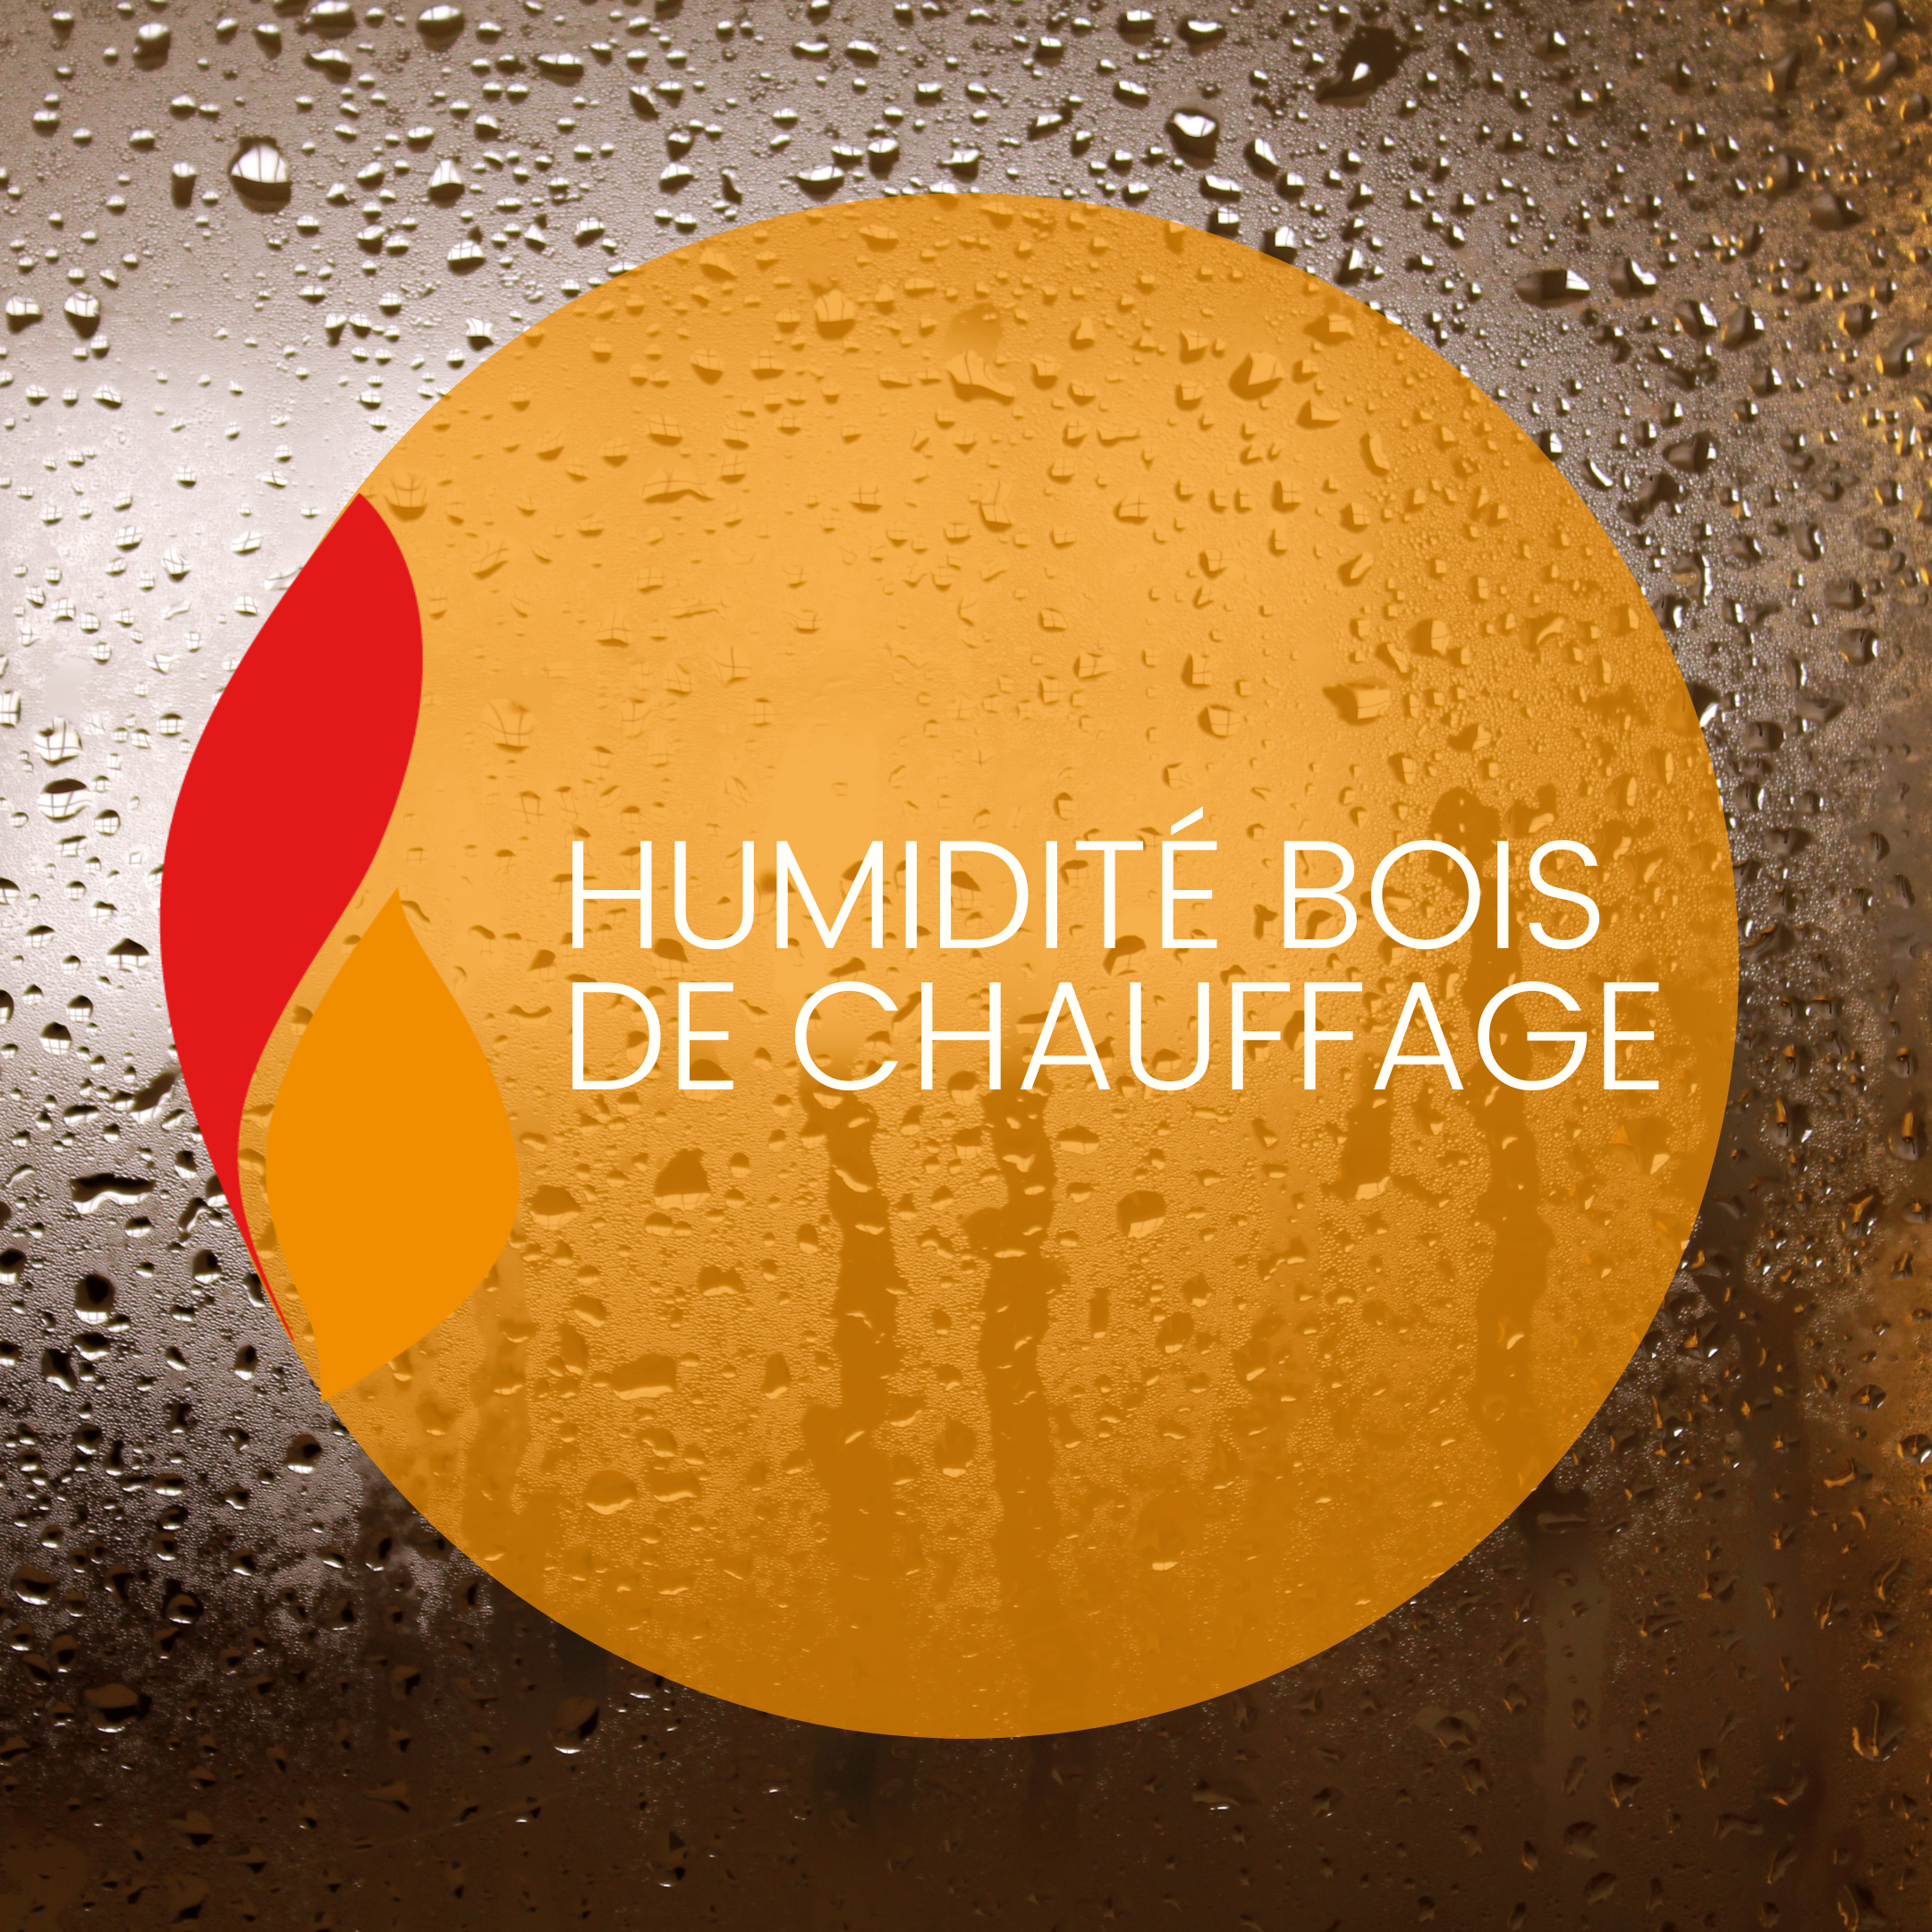 You are currently viewing Humidité bois de chauffage